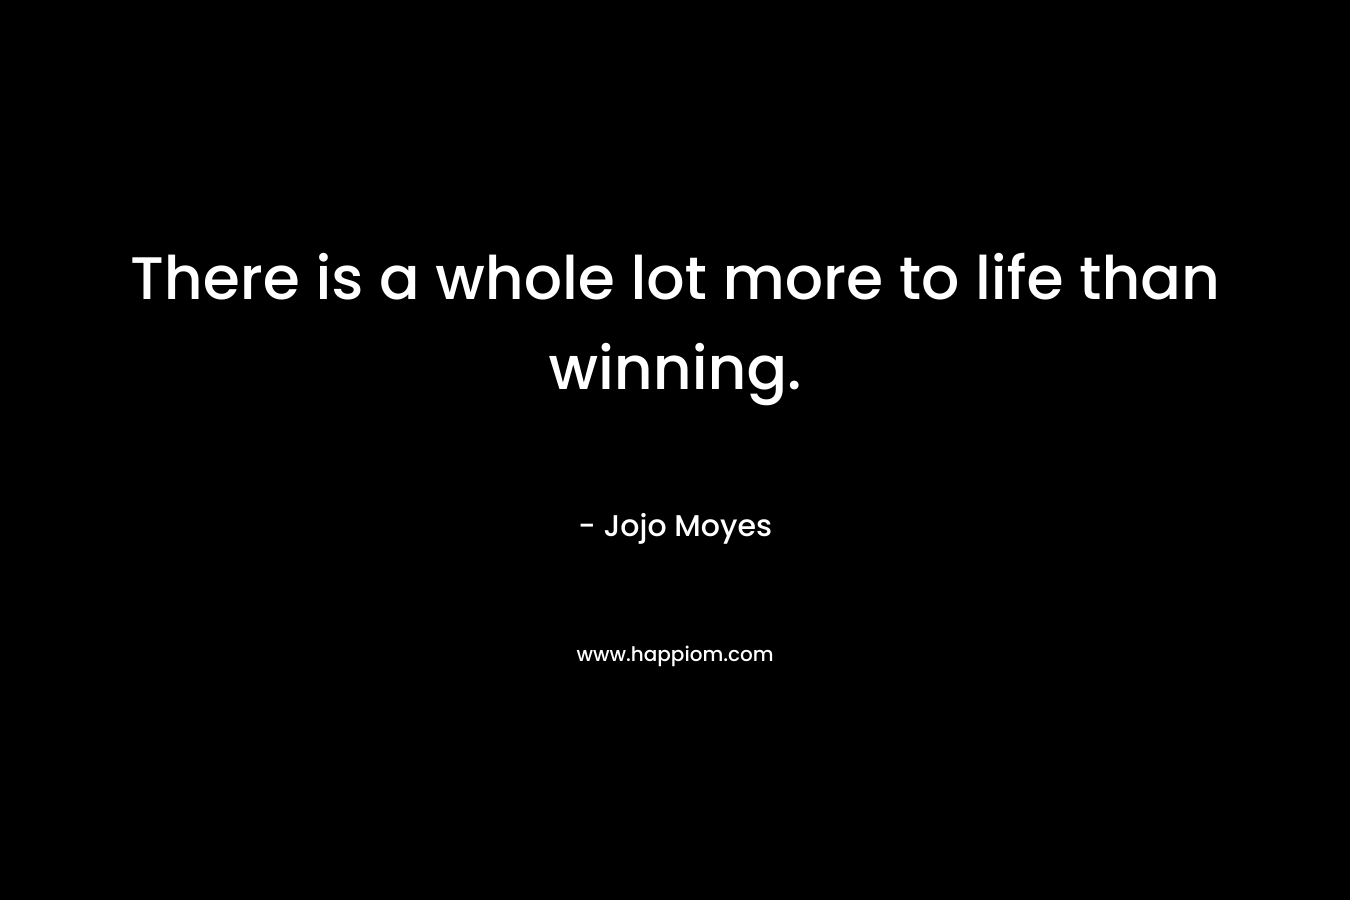 There is a whole lot more to life than winning.